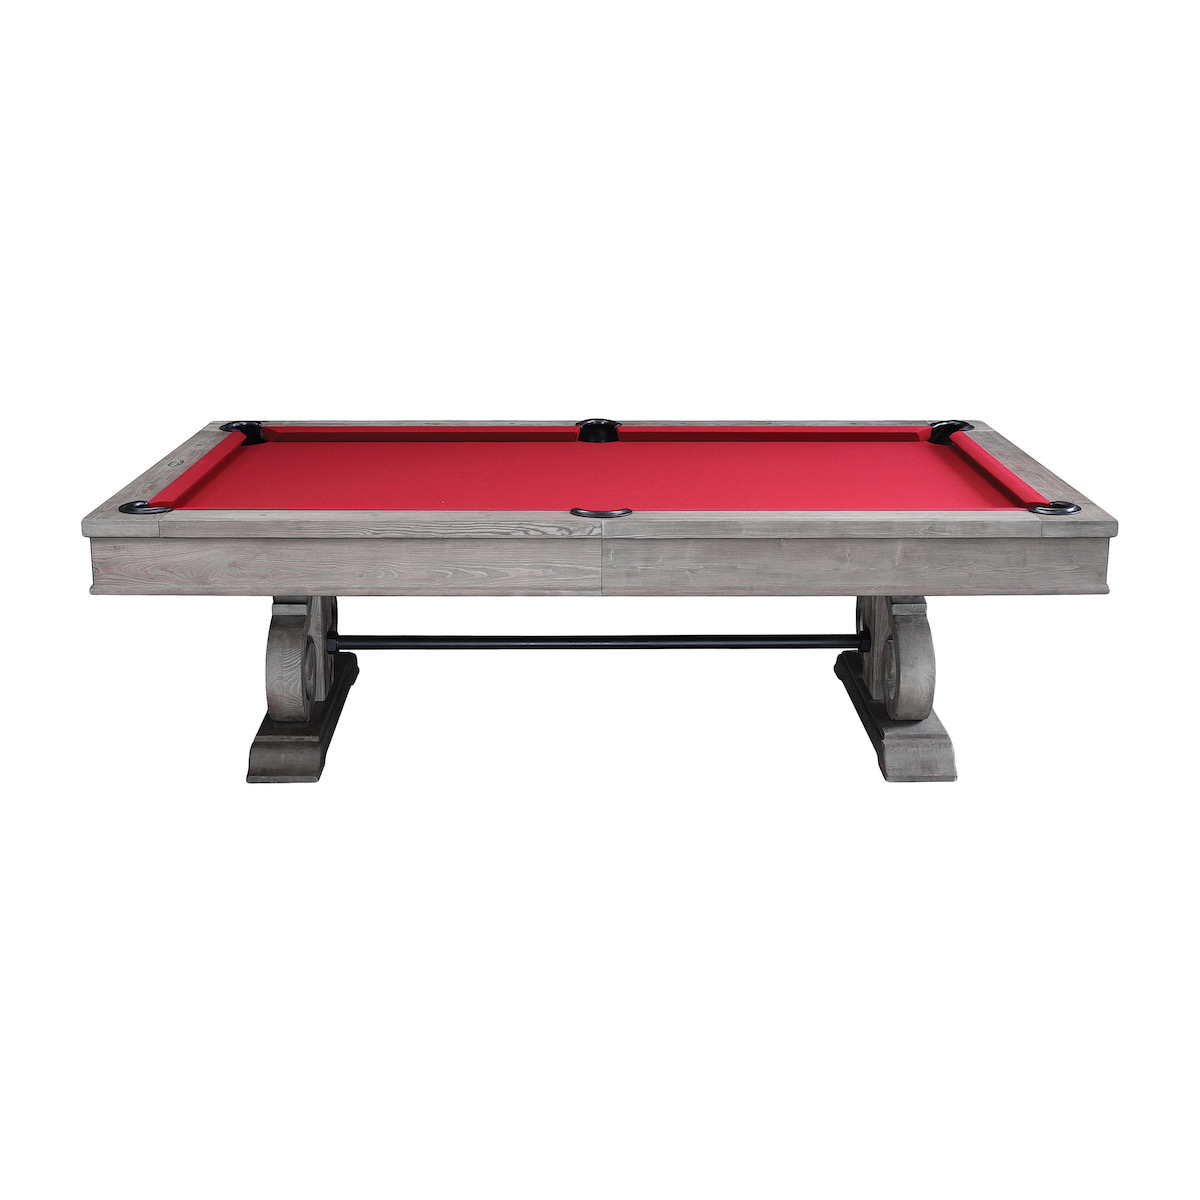 Imperial Barstable Pool Table